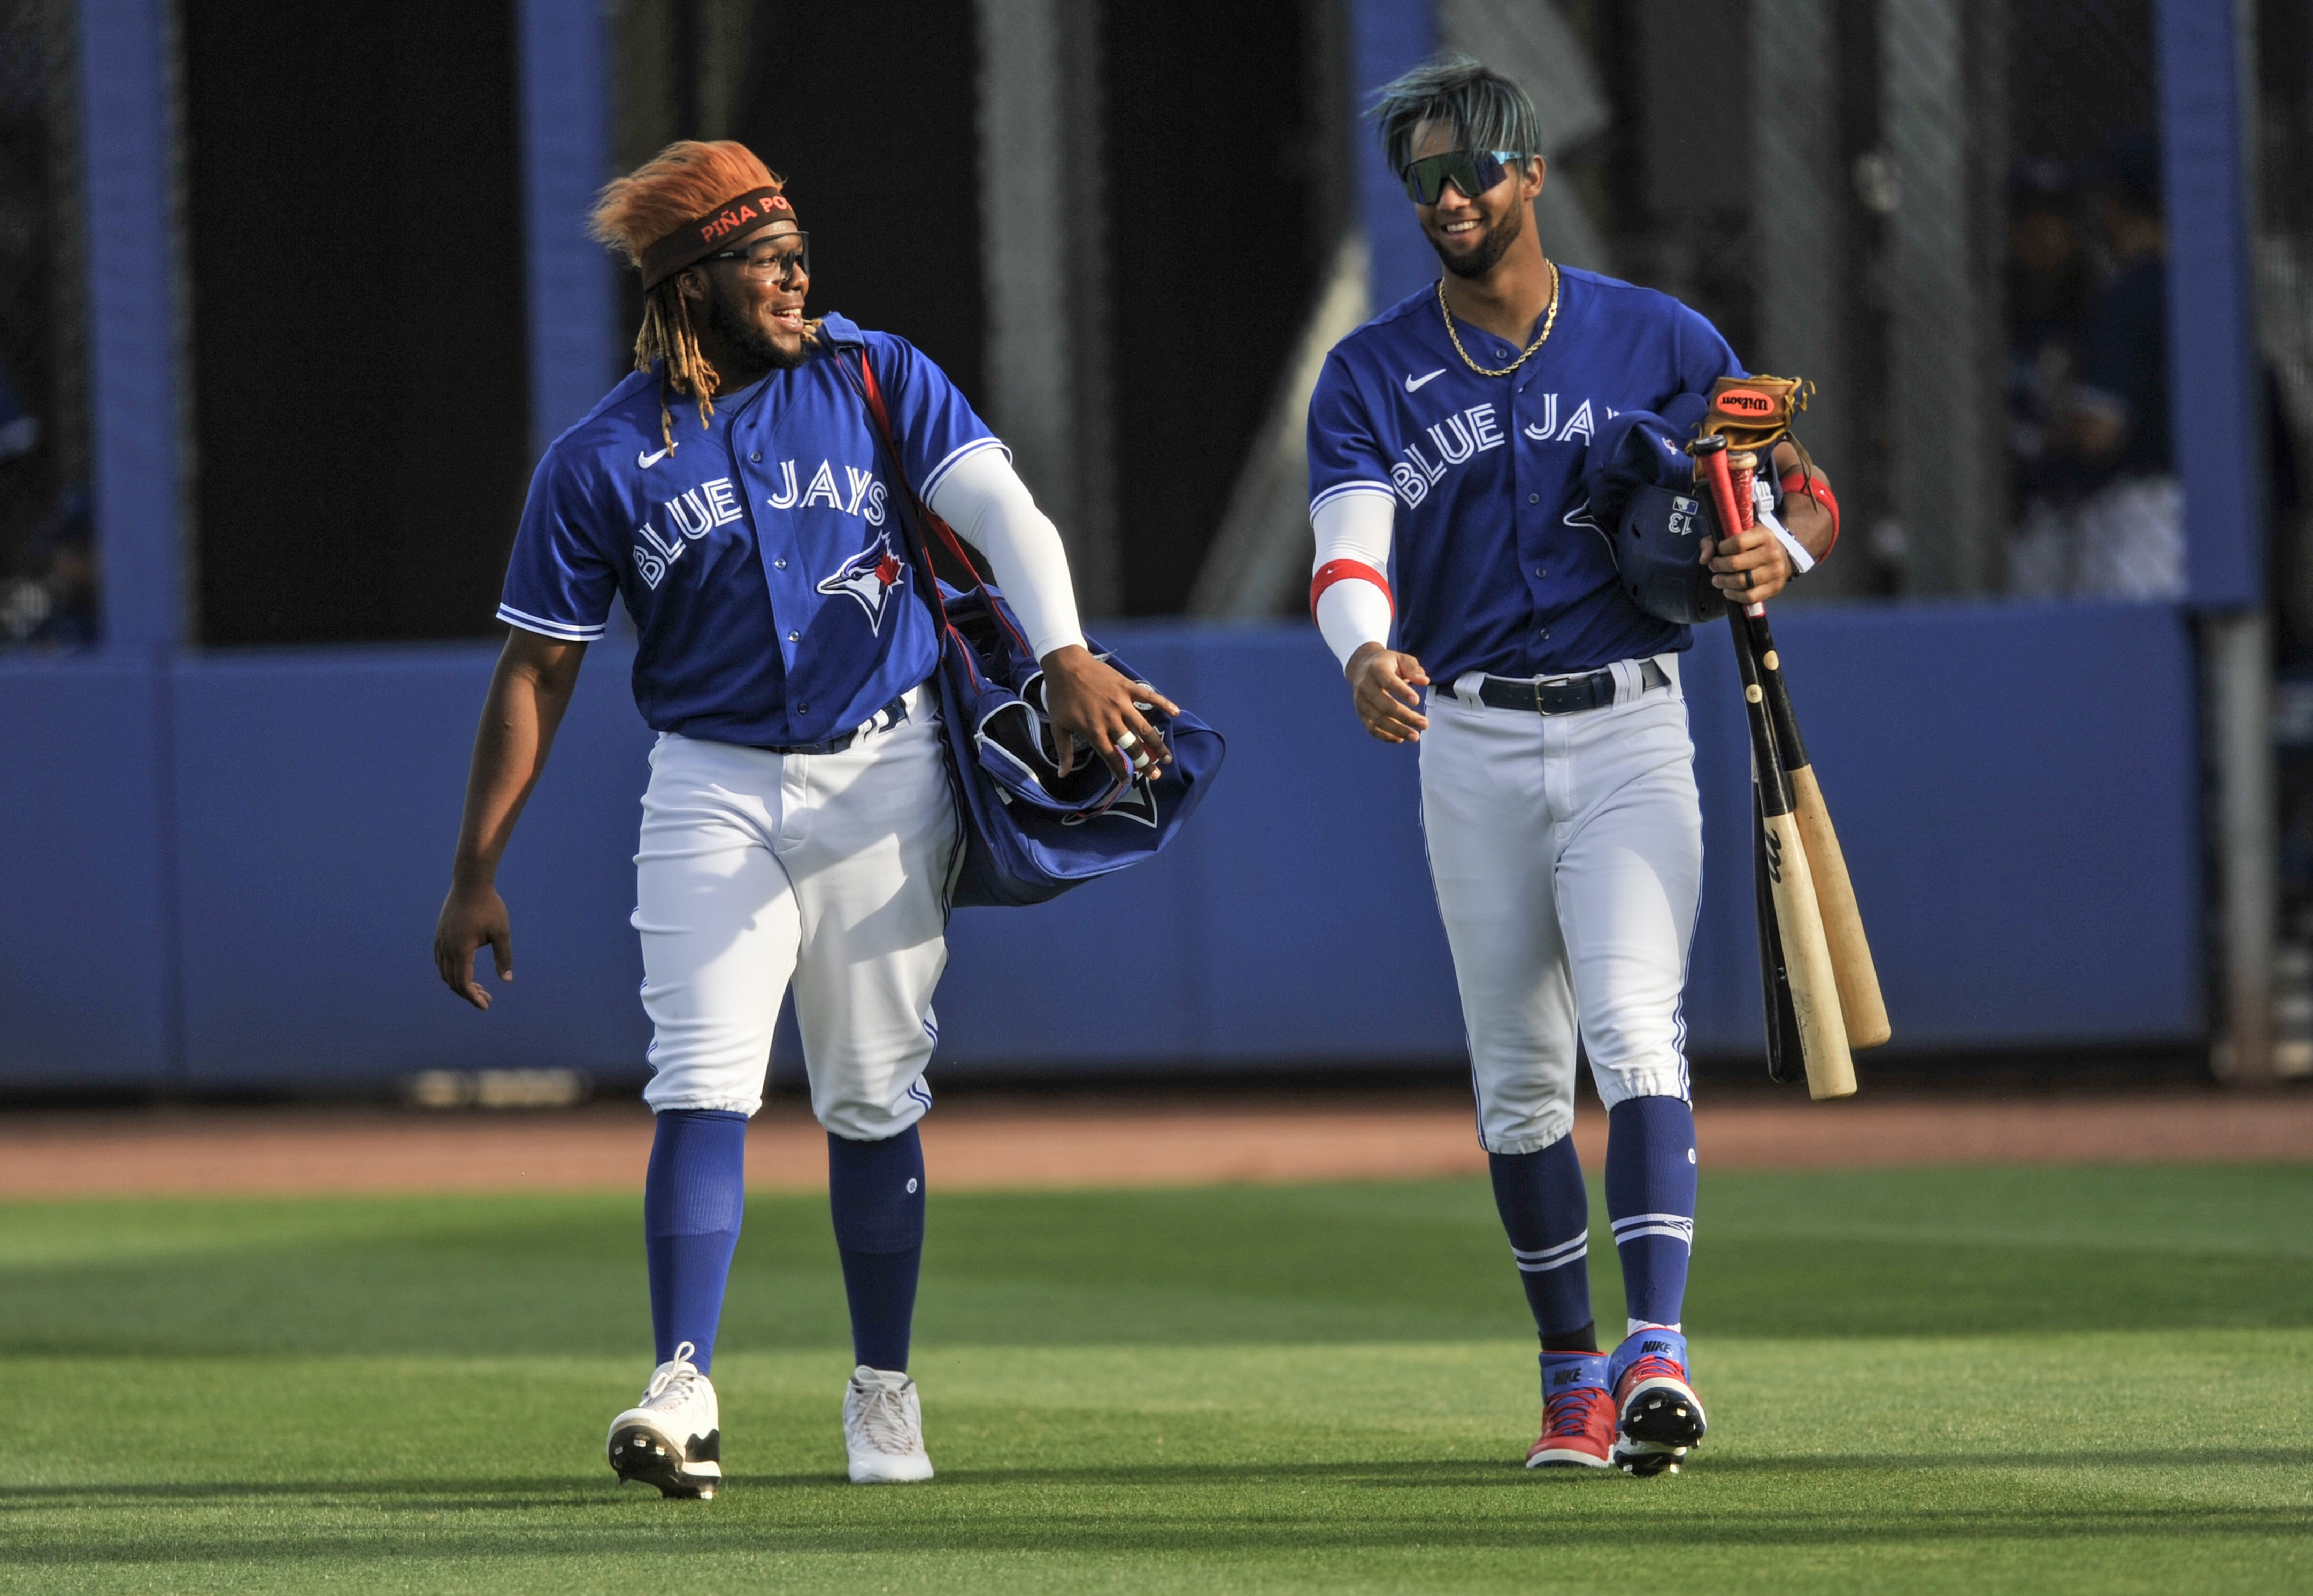 Vladimir Guerrero Jr. is hitting well after his Derby win, and Toronto's  offense could use a boost - ABC News